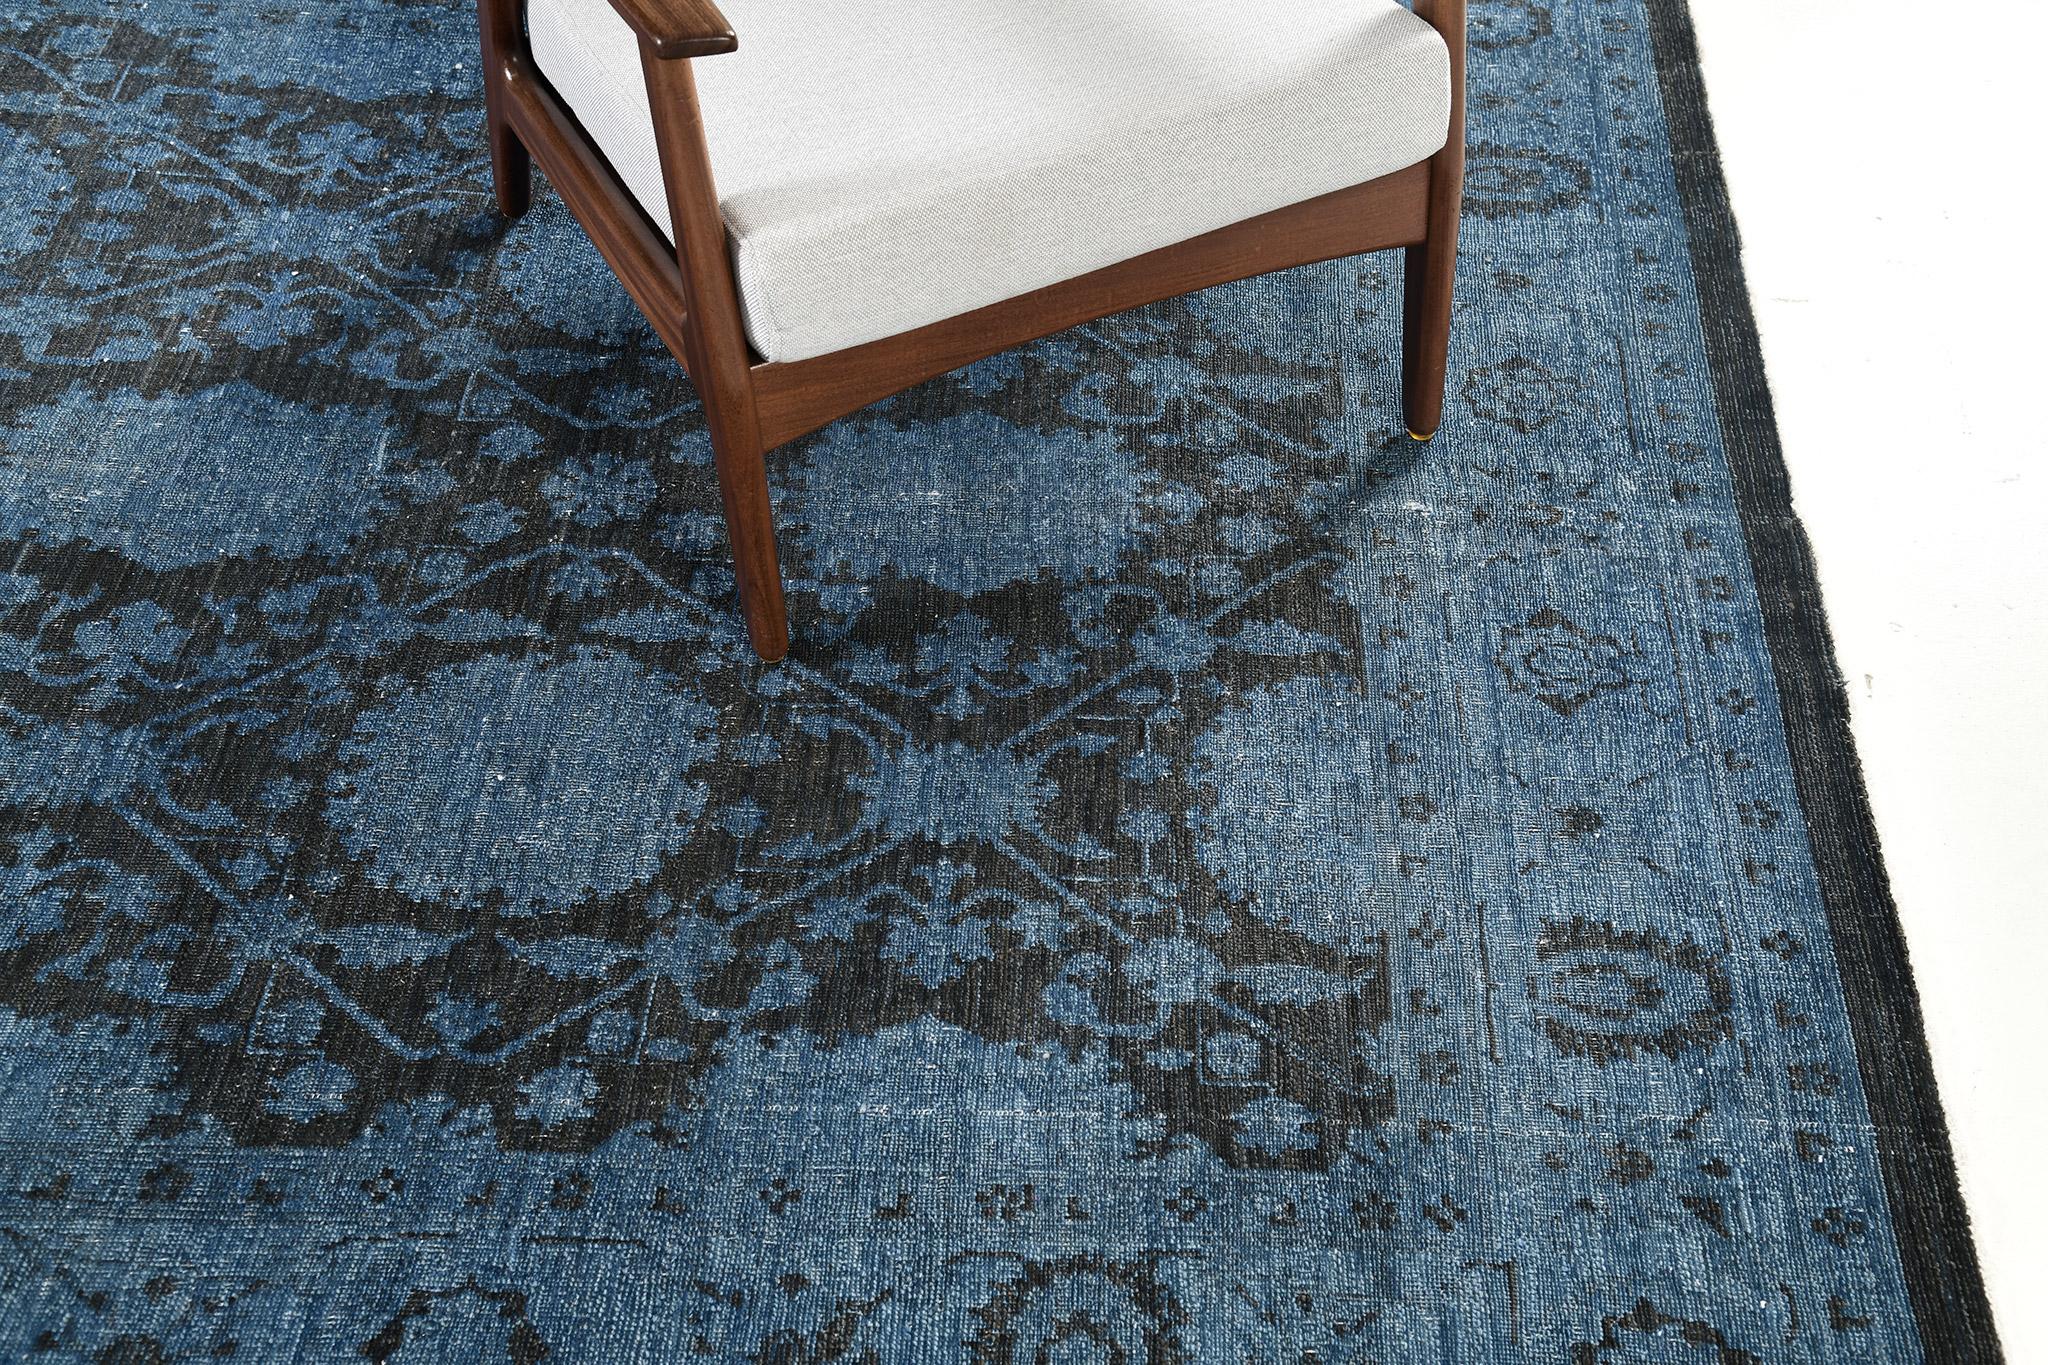 A captivating rug that features a simple but very chic in overdyed cobalt blue. This rug is versatile on every layout you might create. Perfect for your traditional and modern home interior that matches your enthusiastic and artistic style.

Rug